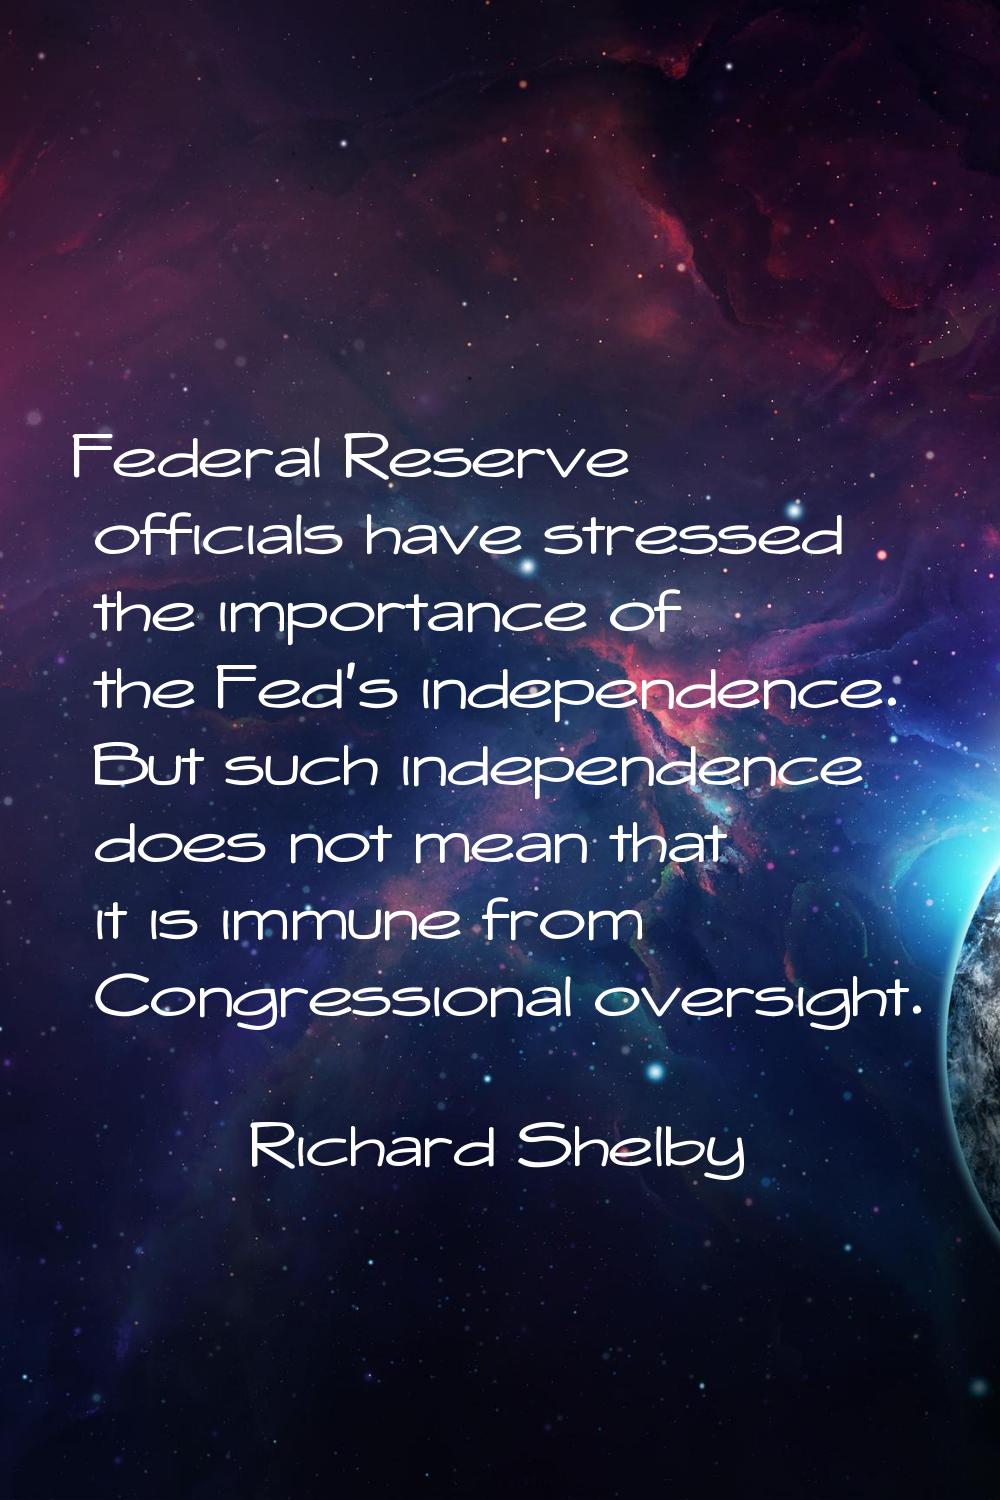 Federal Reserve officials have stressed the importance of the Fed's independence. But such independ